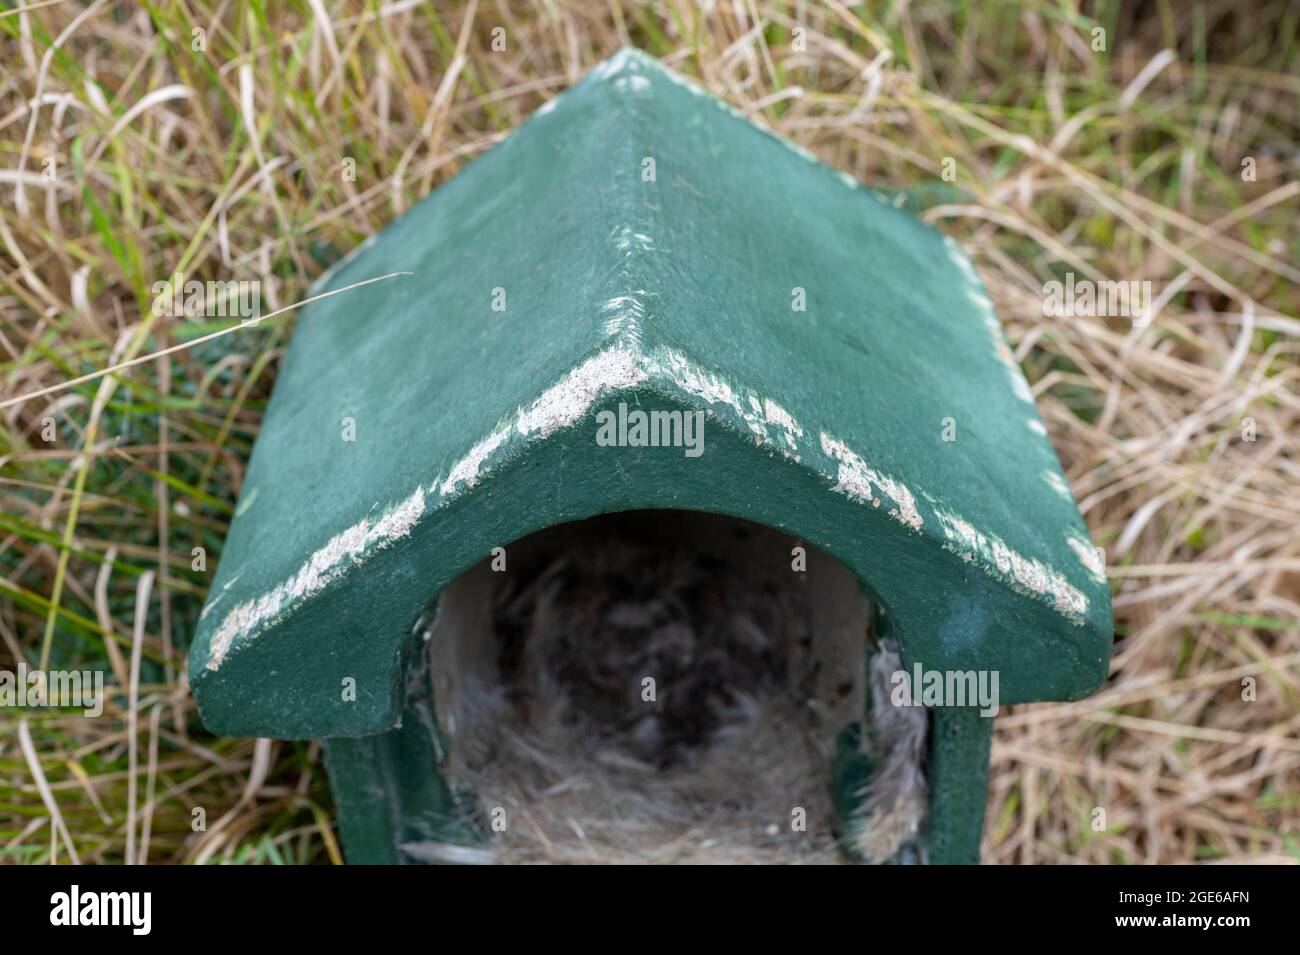 Damage to the top of a bird nest box caused by squirrels chewing on the roof. Stock Photo